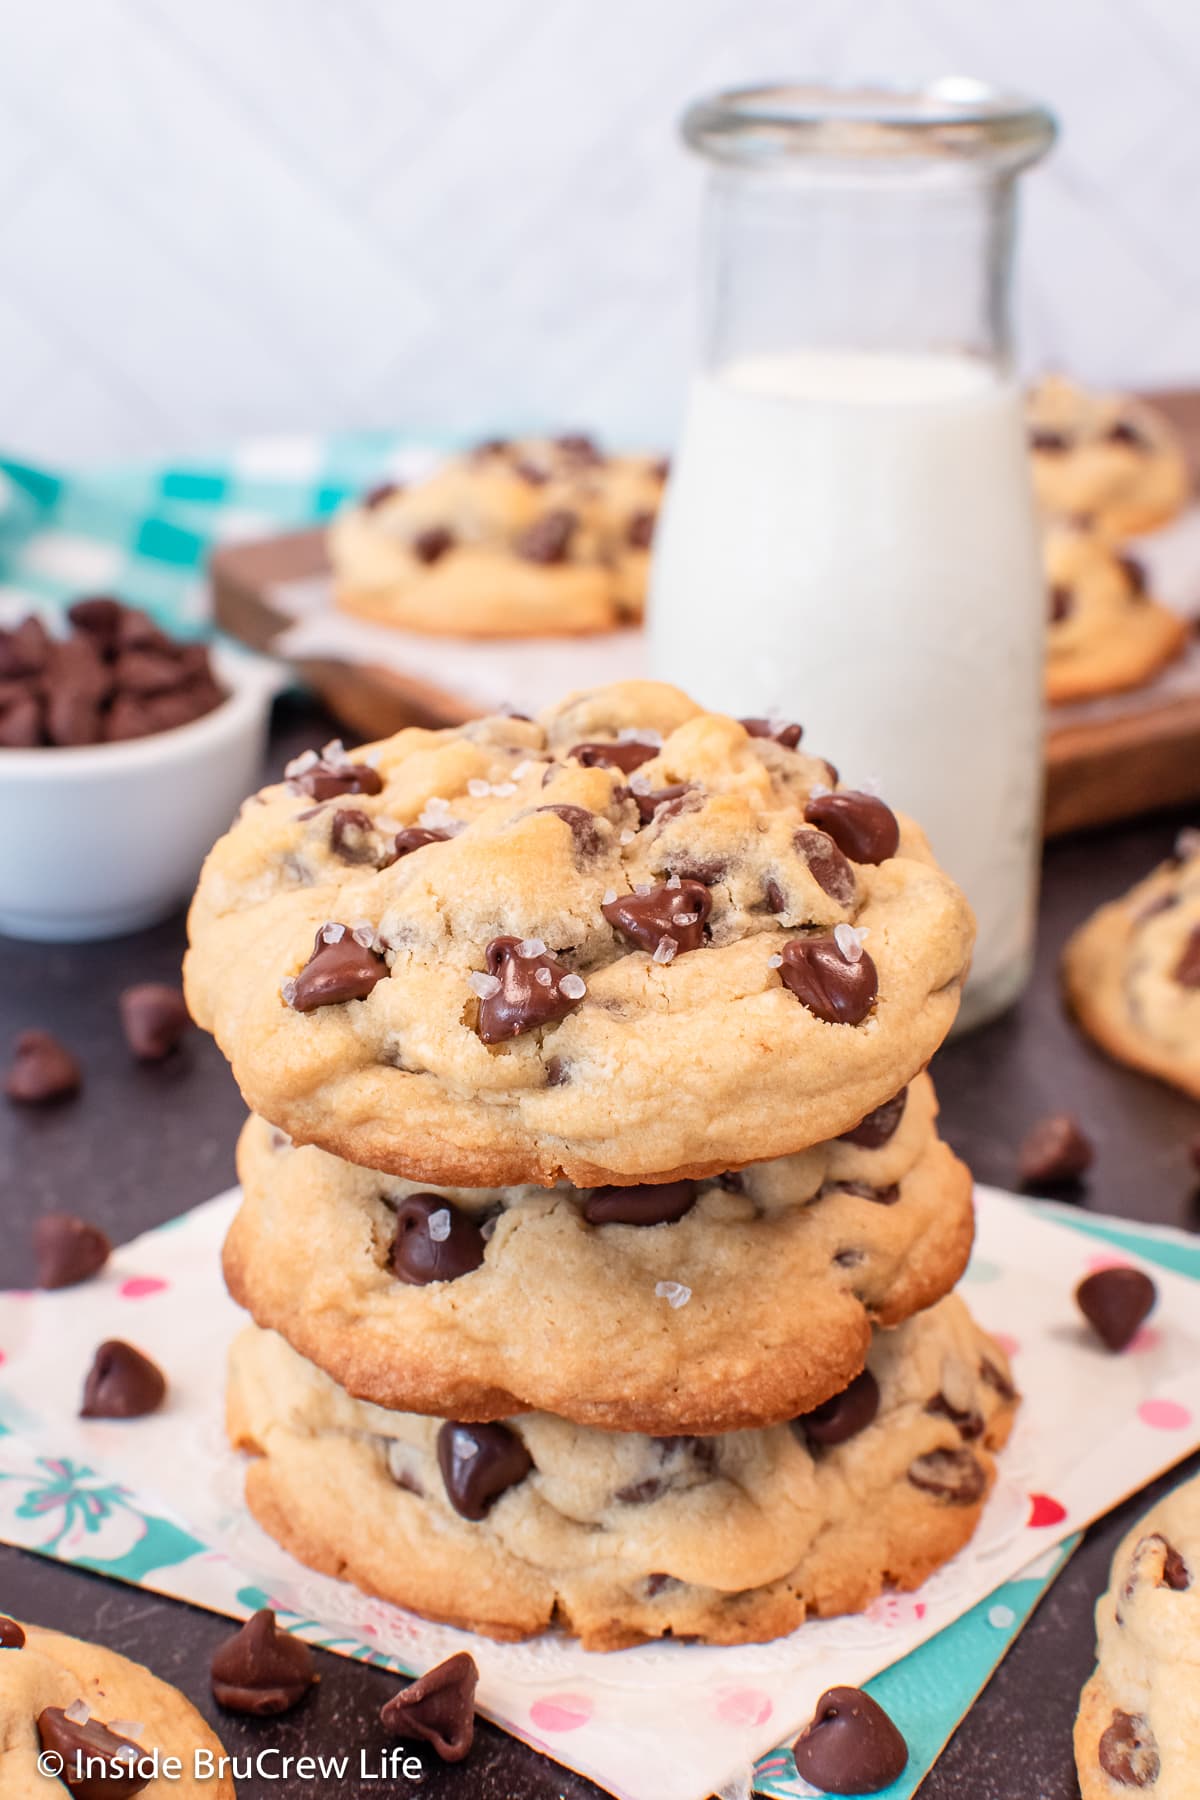 A stack of three puffy chocolate chip cookies on a napkin.